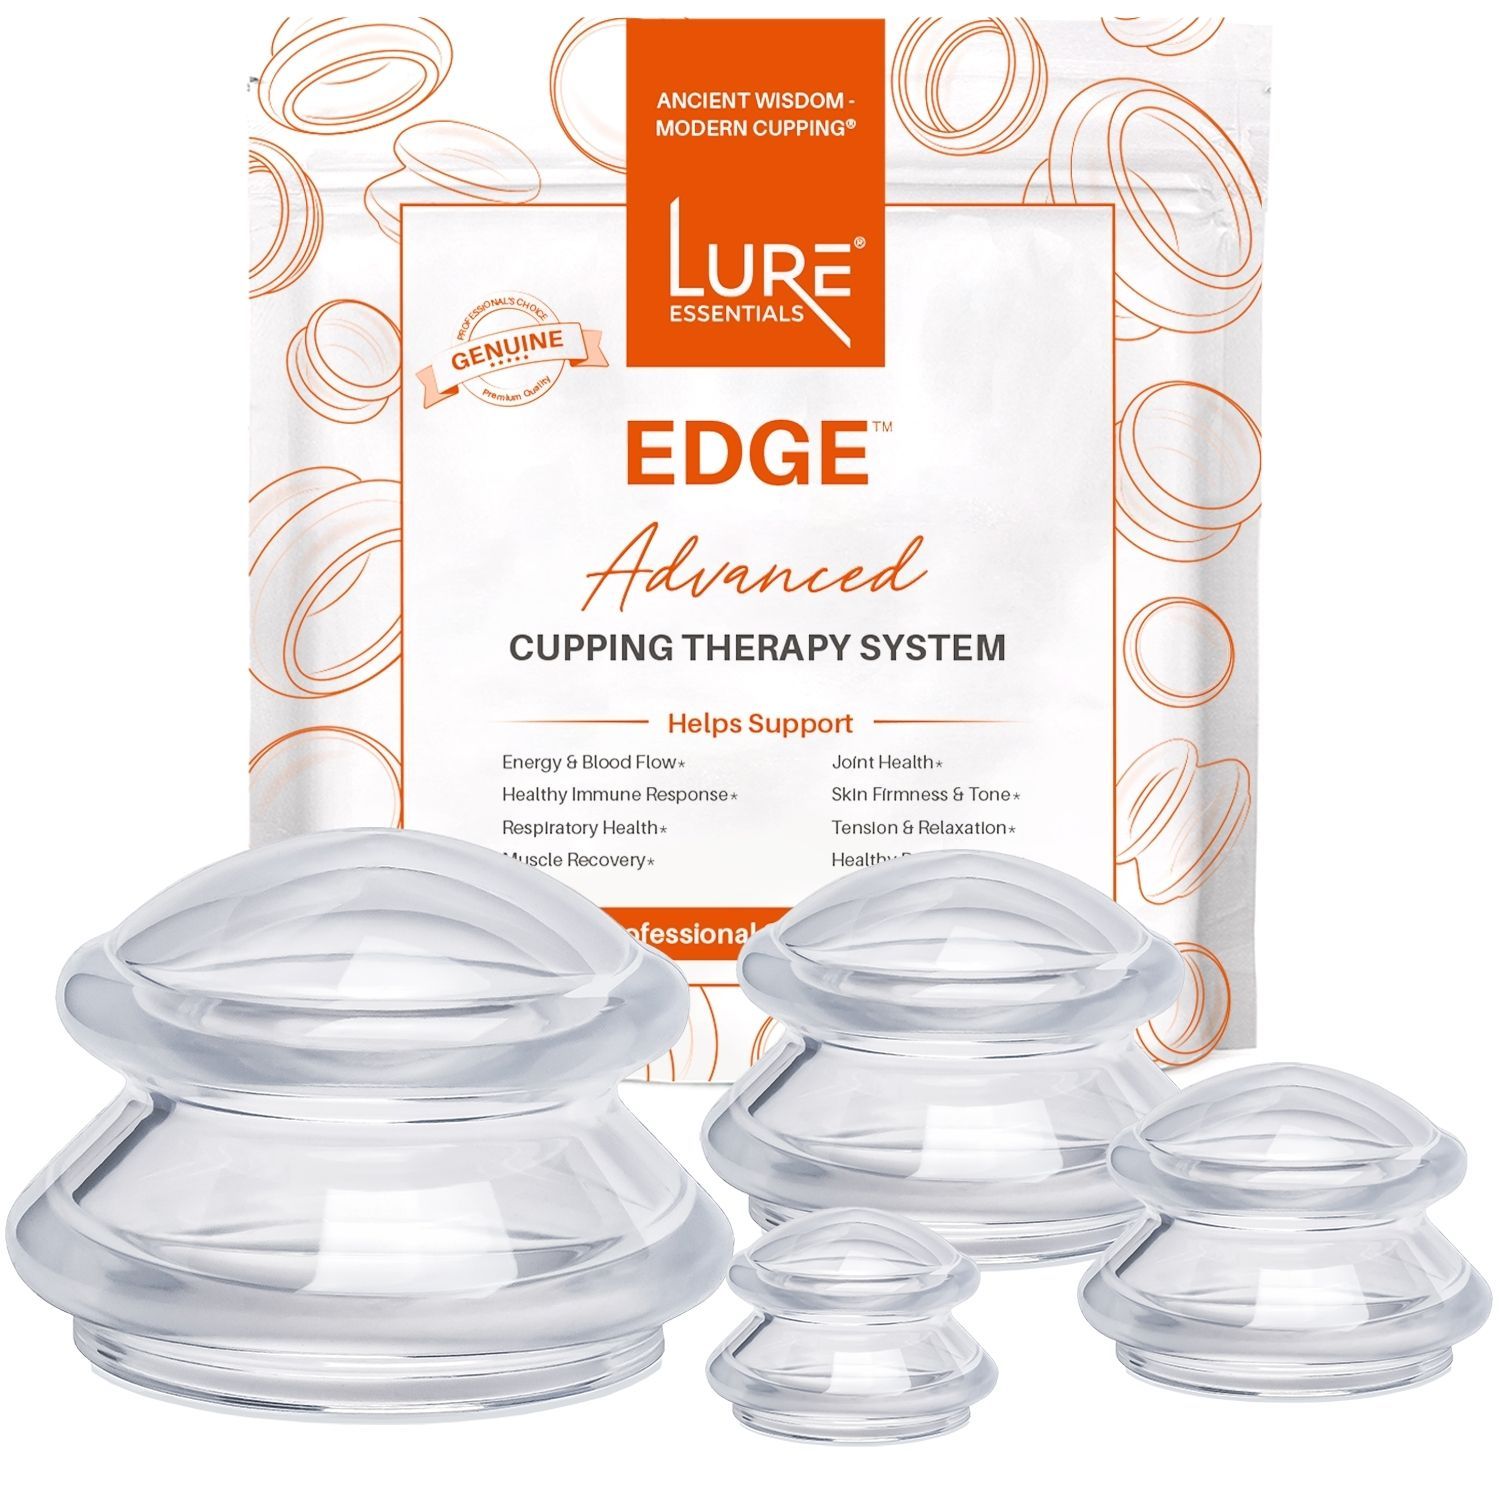  LURE Essentials Edge Cupping Therapy Set - Cupping Kit For  Massage Therapy - Silicone Cupping Set - Massage Cups For Cupping Therapy